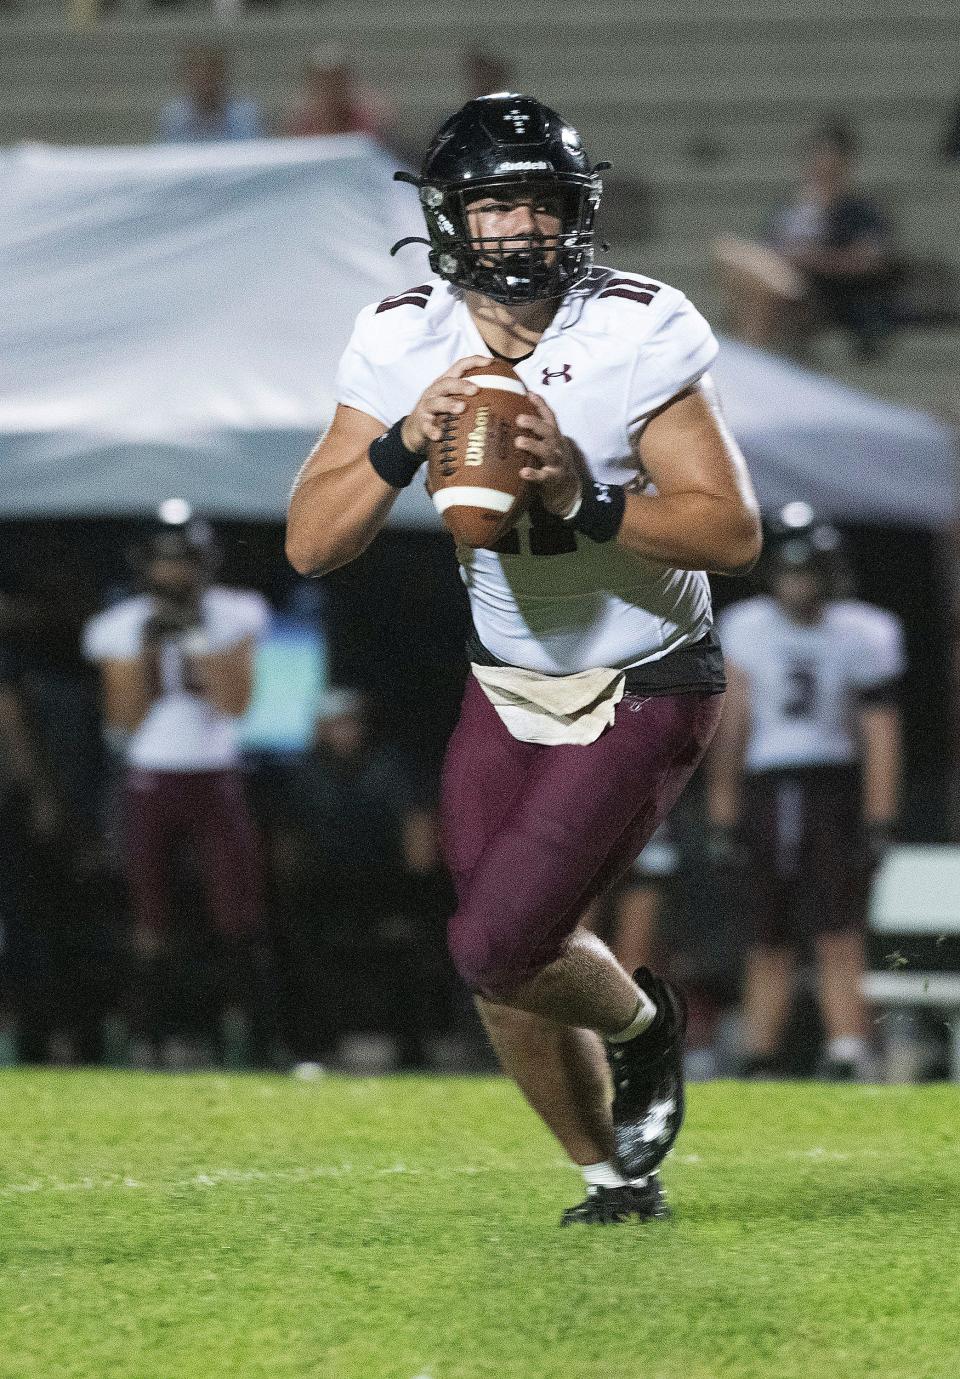 Navarre quarterback Hunter Pfiester (No. 11) scrambles out of the pocket as he looks for an open receiver during Friday's game against Pine Forest.